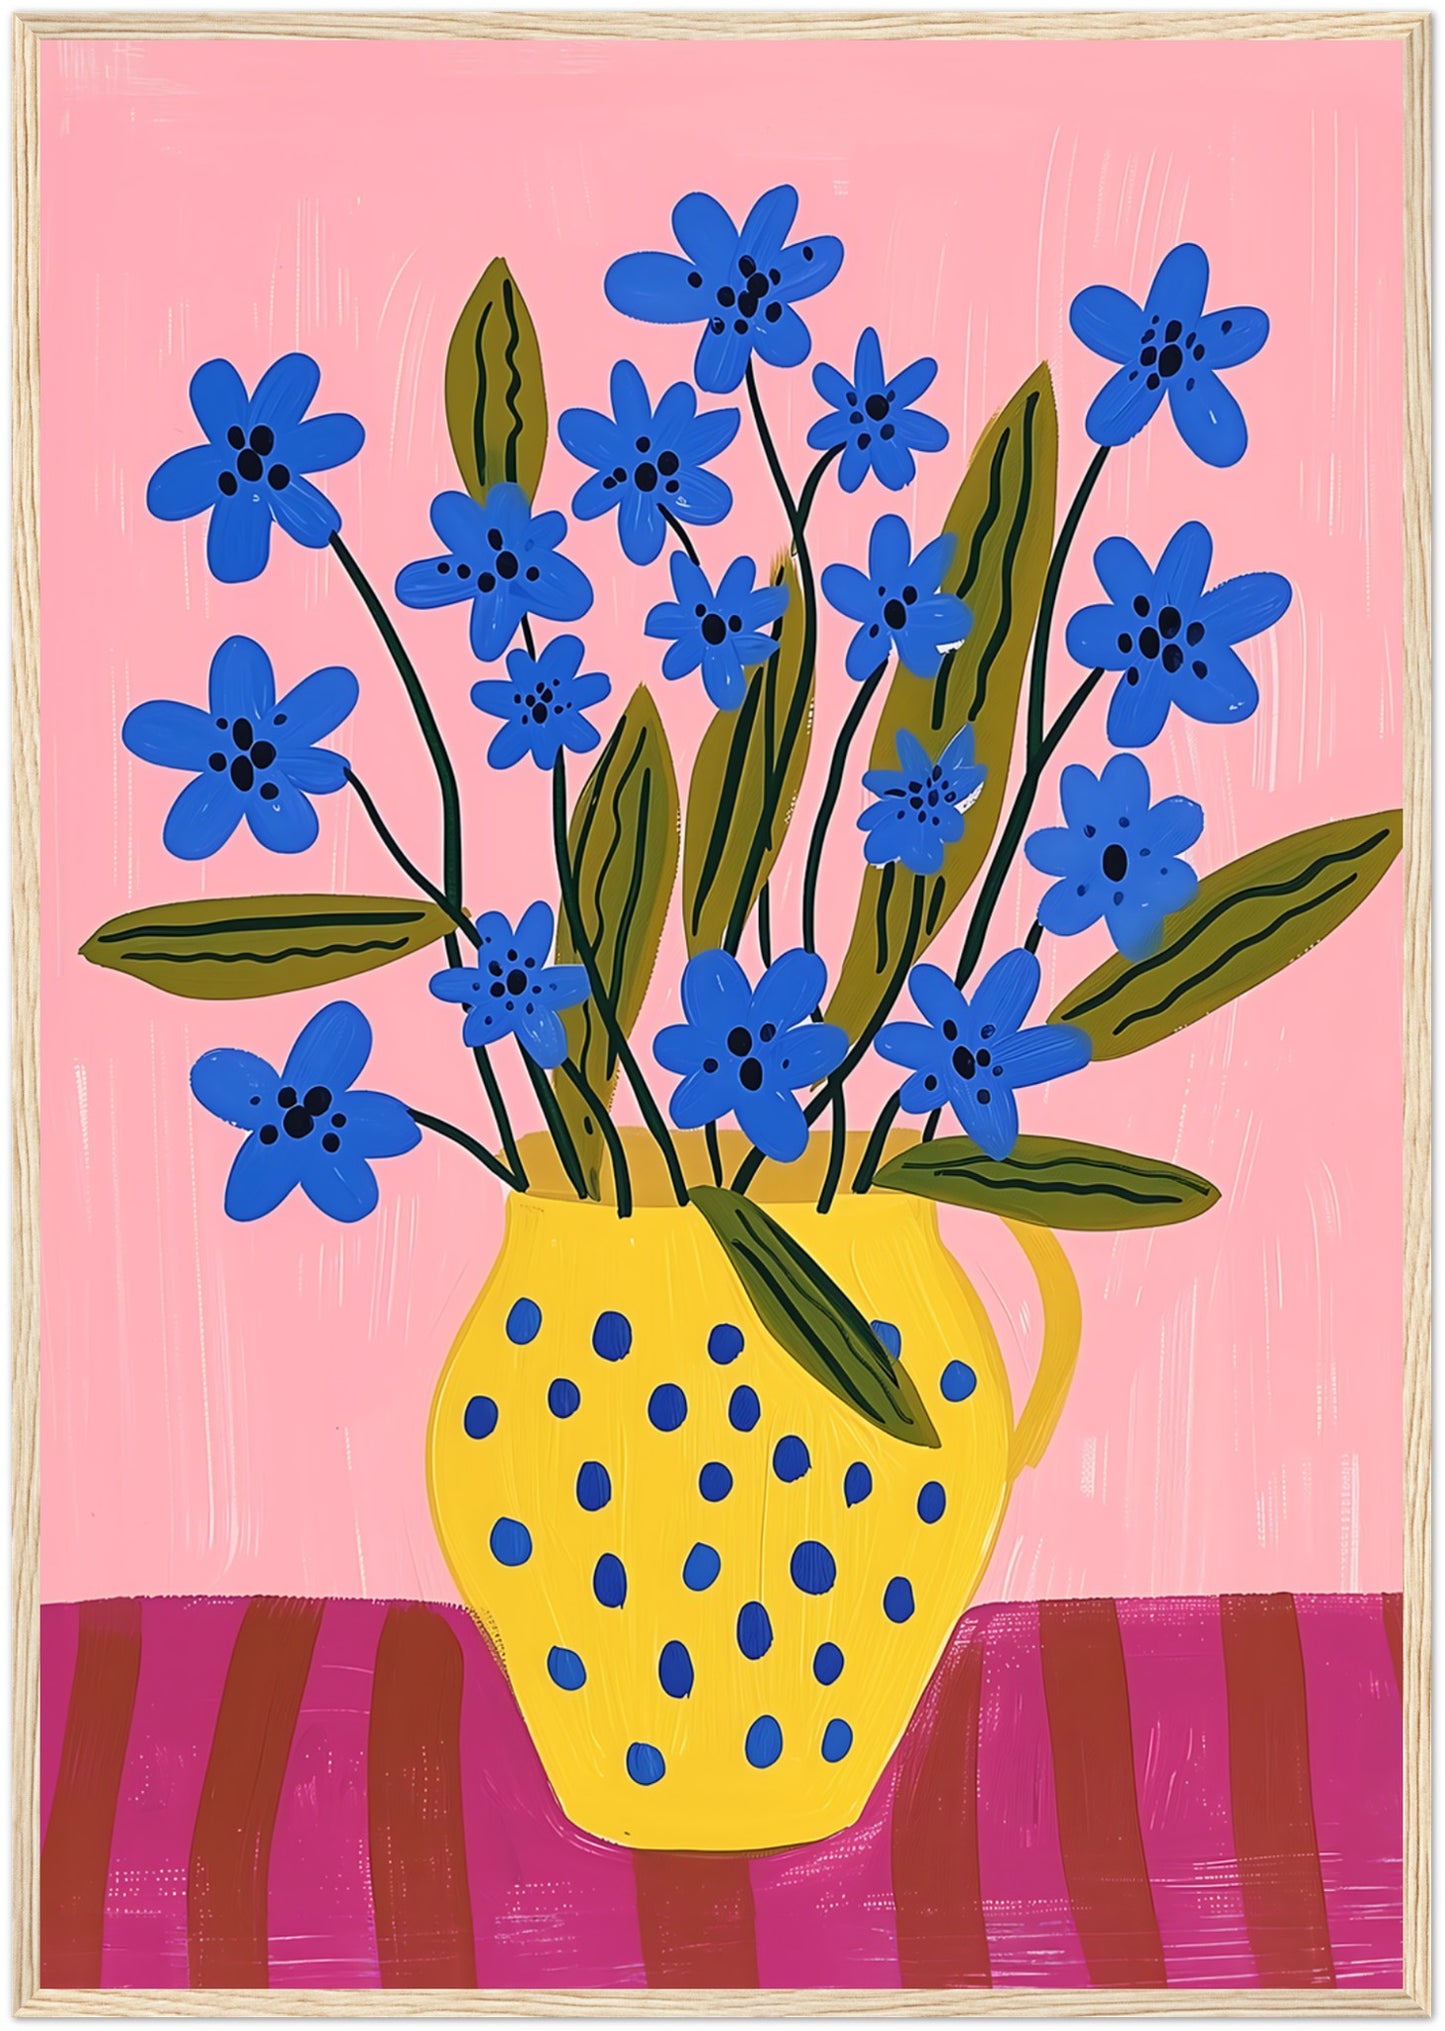 Illustration of blue flowers in a yellow dotted vase against a pink background.